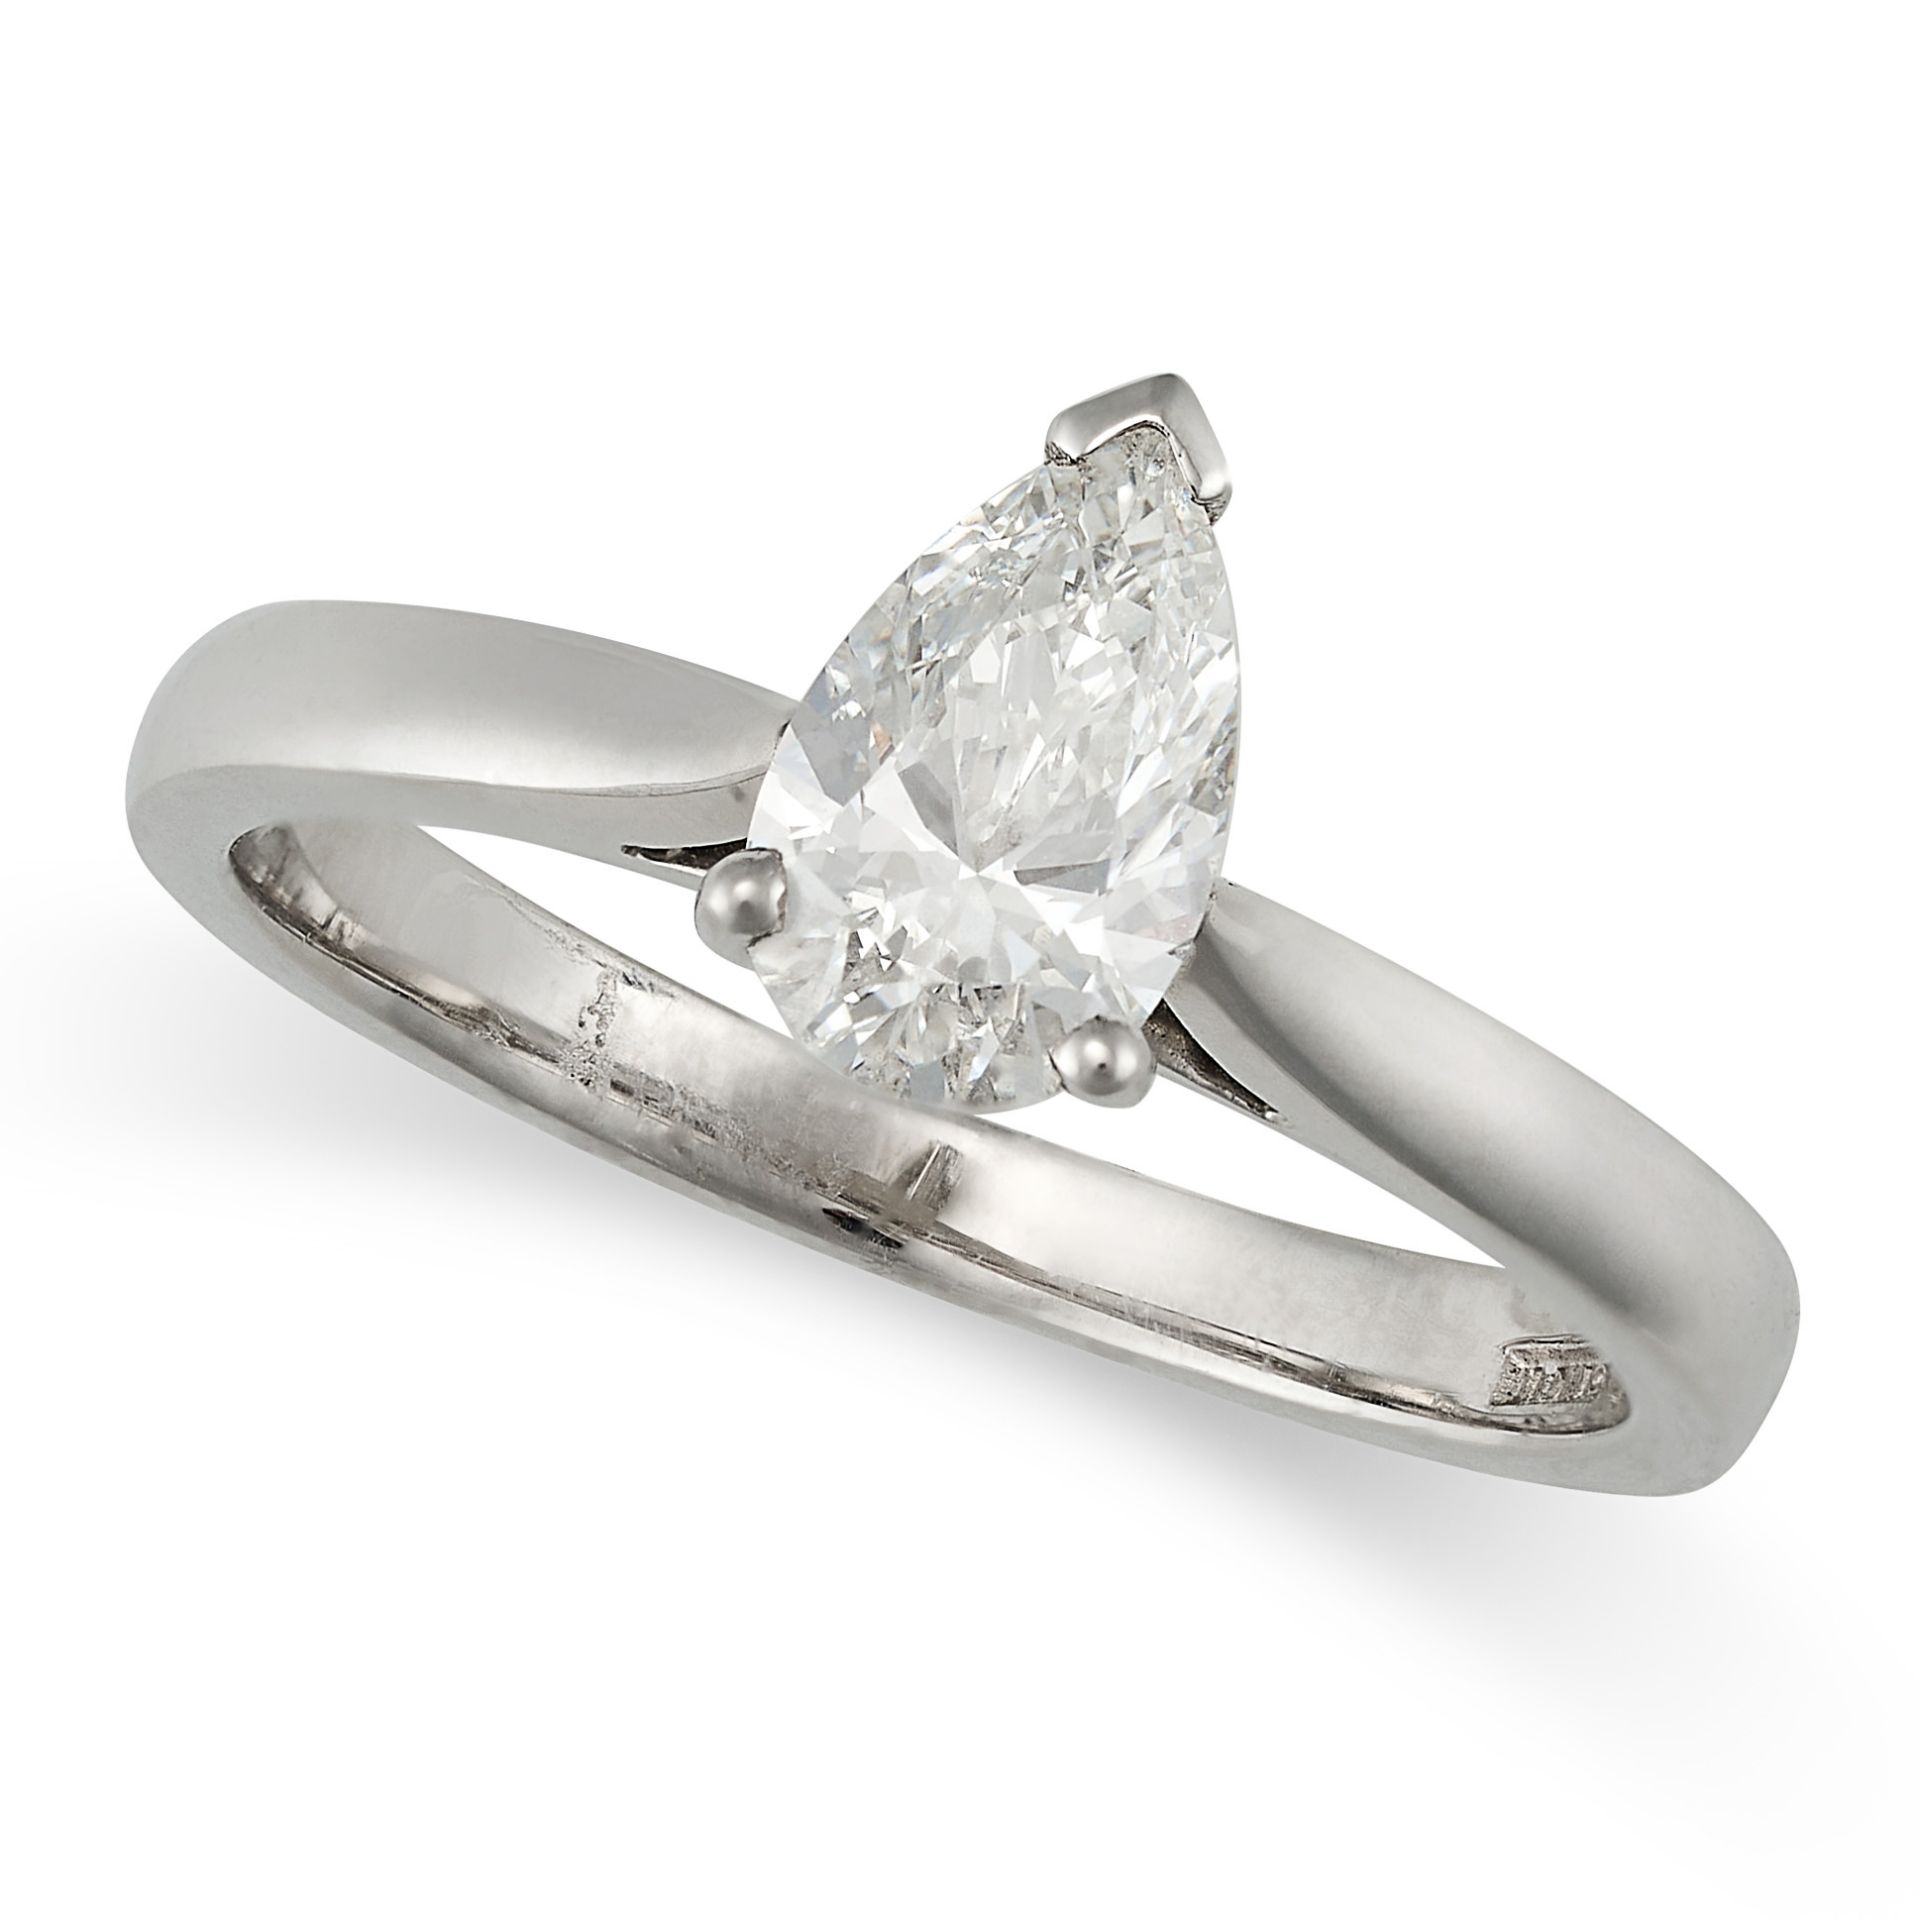 A SOLITAIRE DIAMOND ENGAGMENT RING in platinum, set with a pear cut diamond of 0.80 carats, full ...